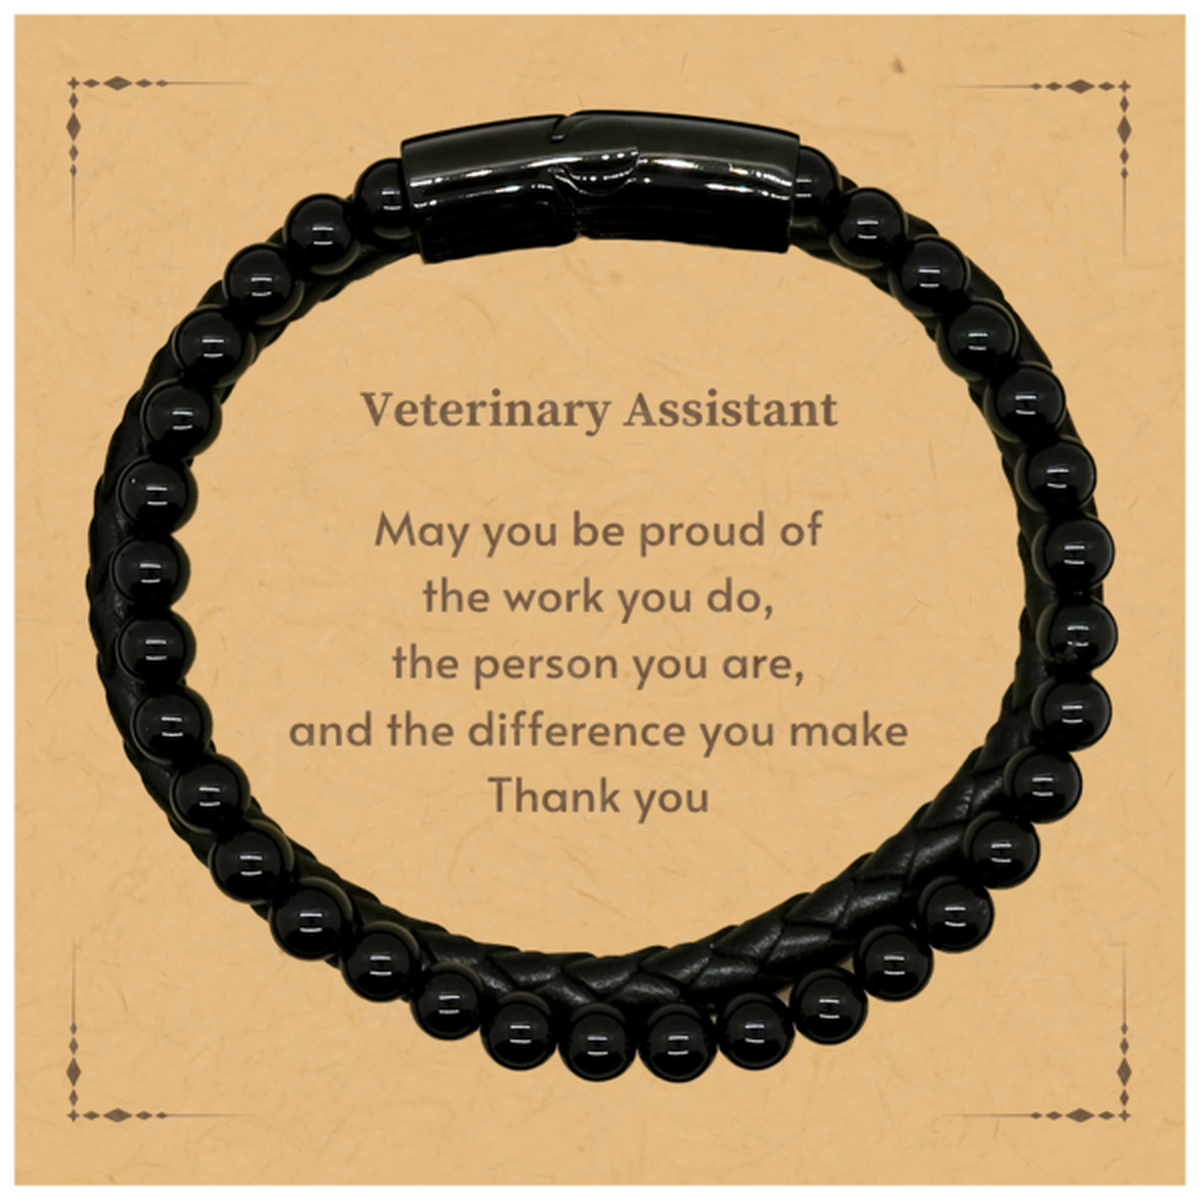 Heartwarming Stone Leather Bracelets Retirement Coworkers Gifts for Veterinary Assistant, Veterinary Assistant May You be proud of the work you do, the person you are Gifts for Boss Men Women Friends